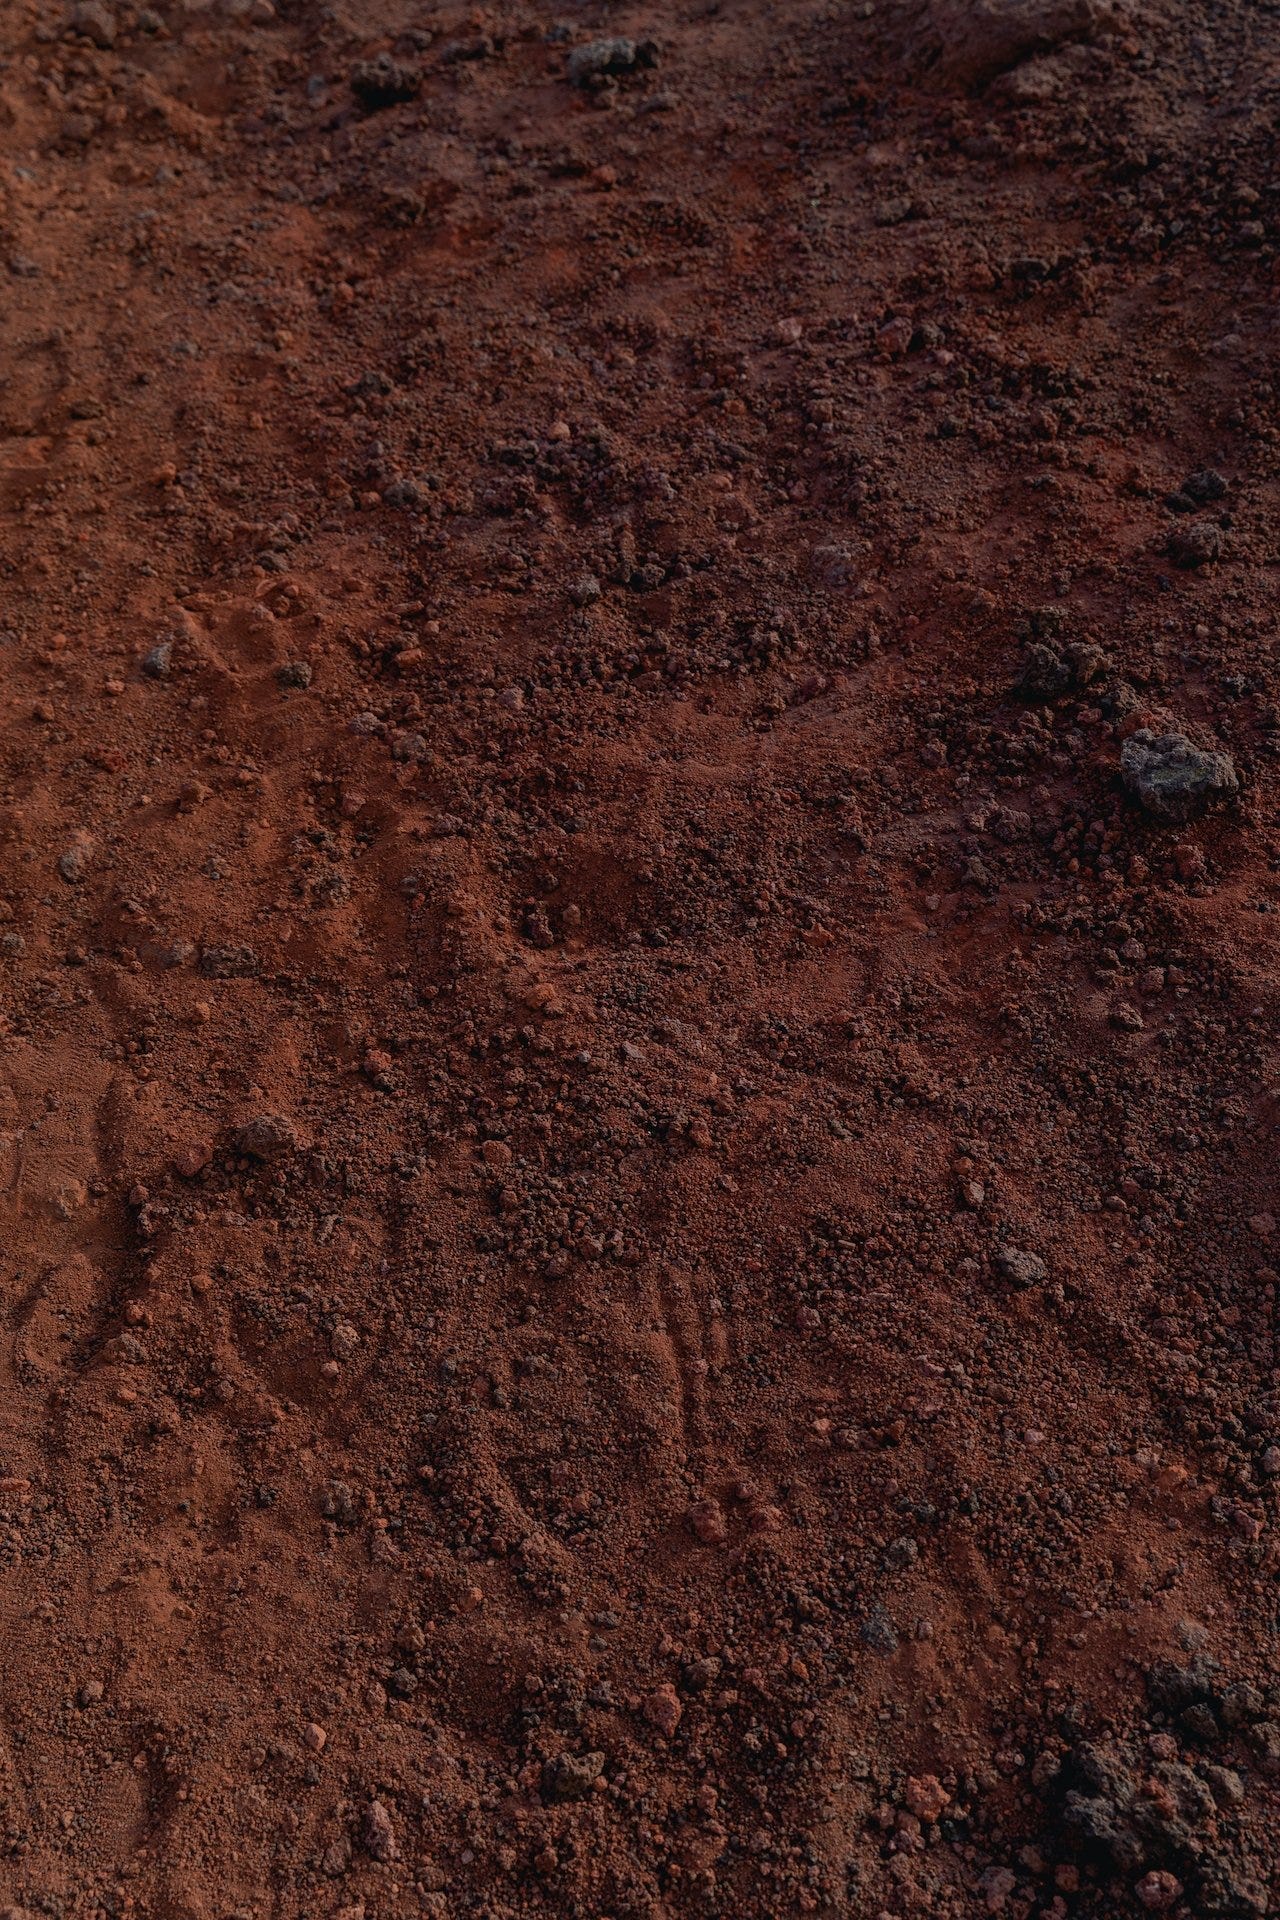 An ombre of reddish-brown, rocky soil shows signs of digging.